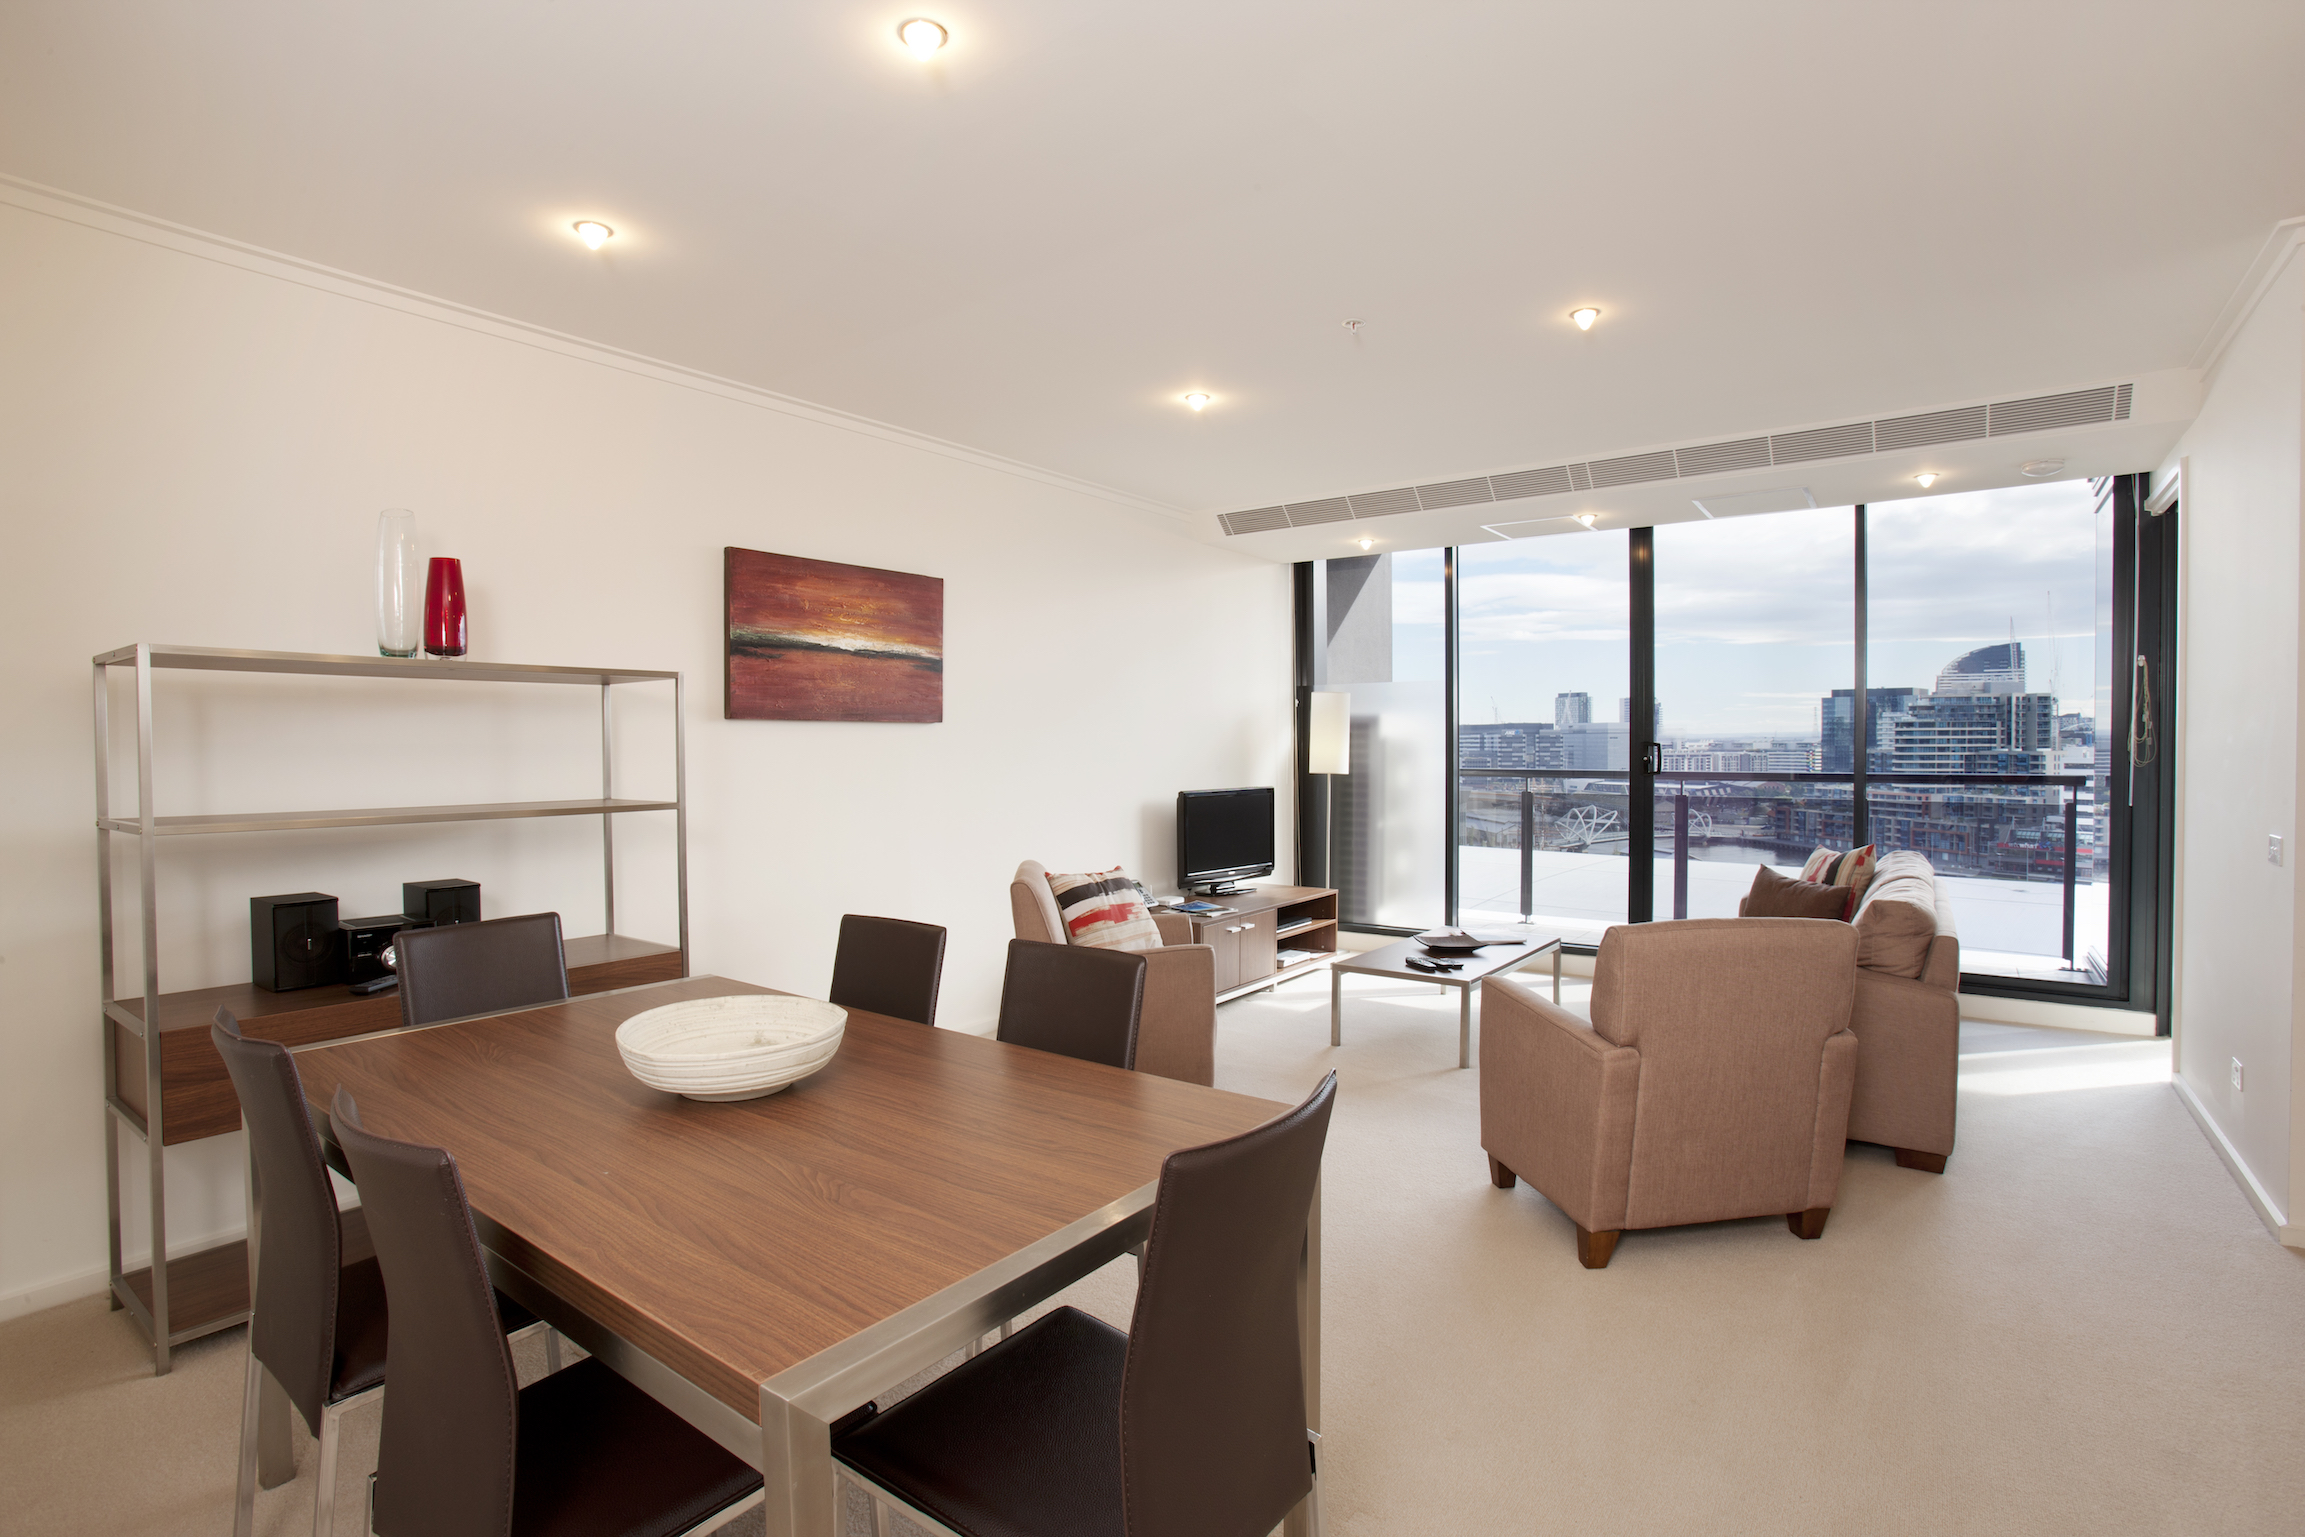 Melbourne Short Stay Apartments - On Whiteman